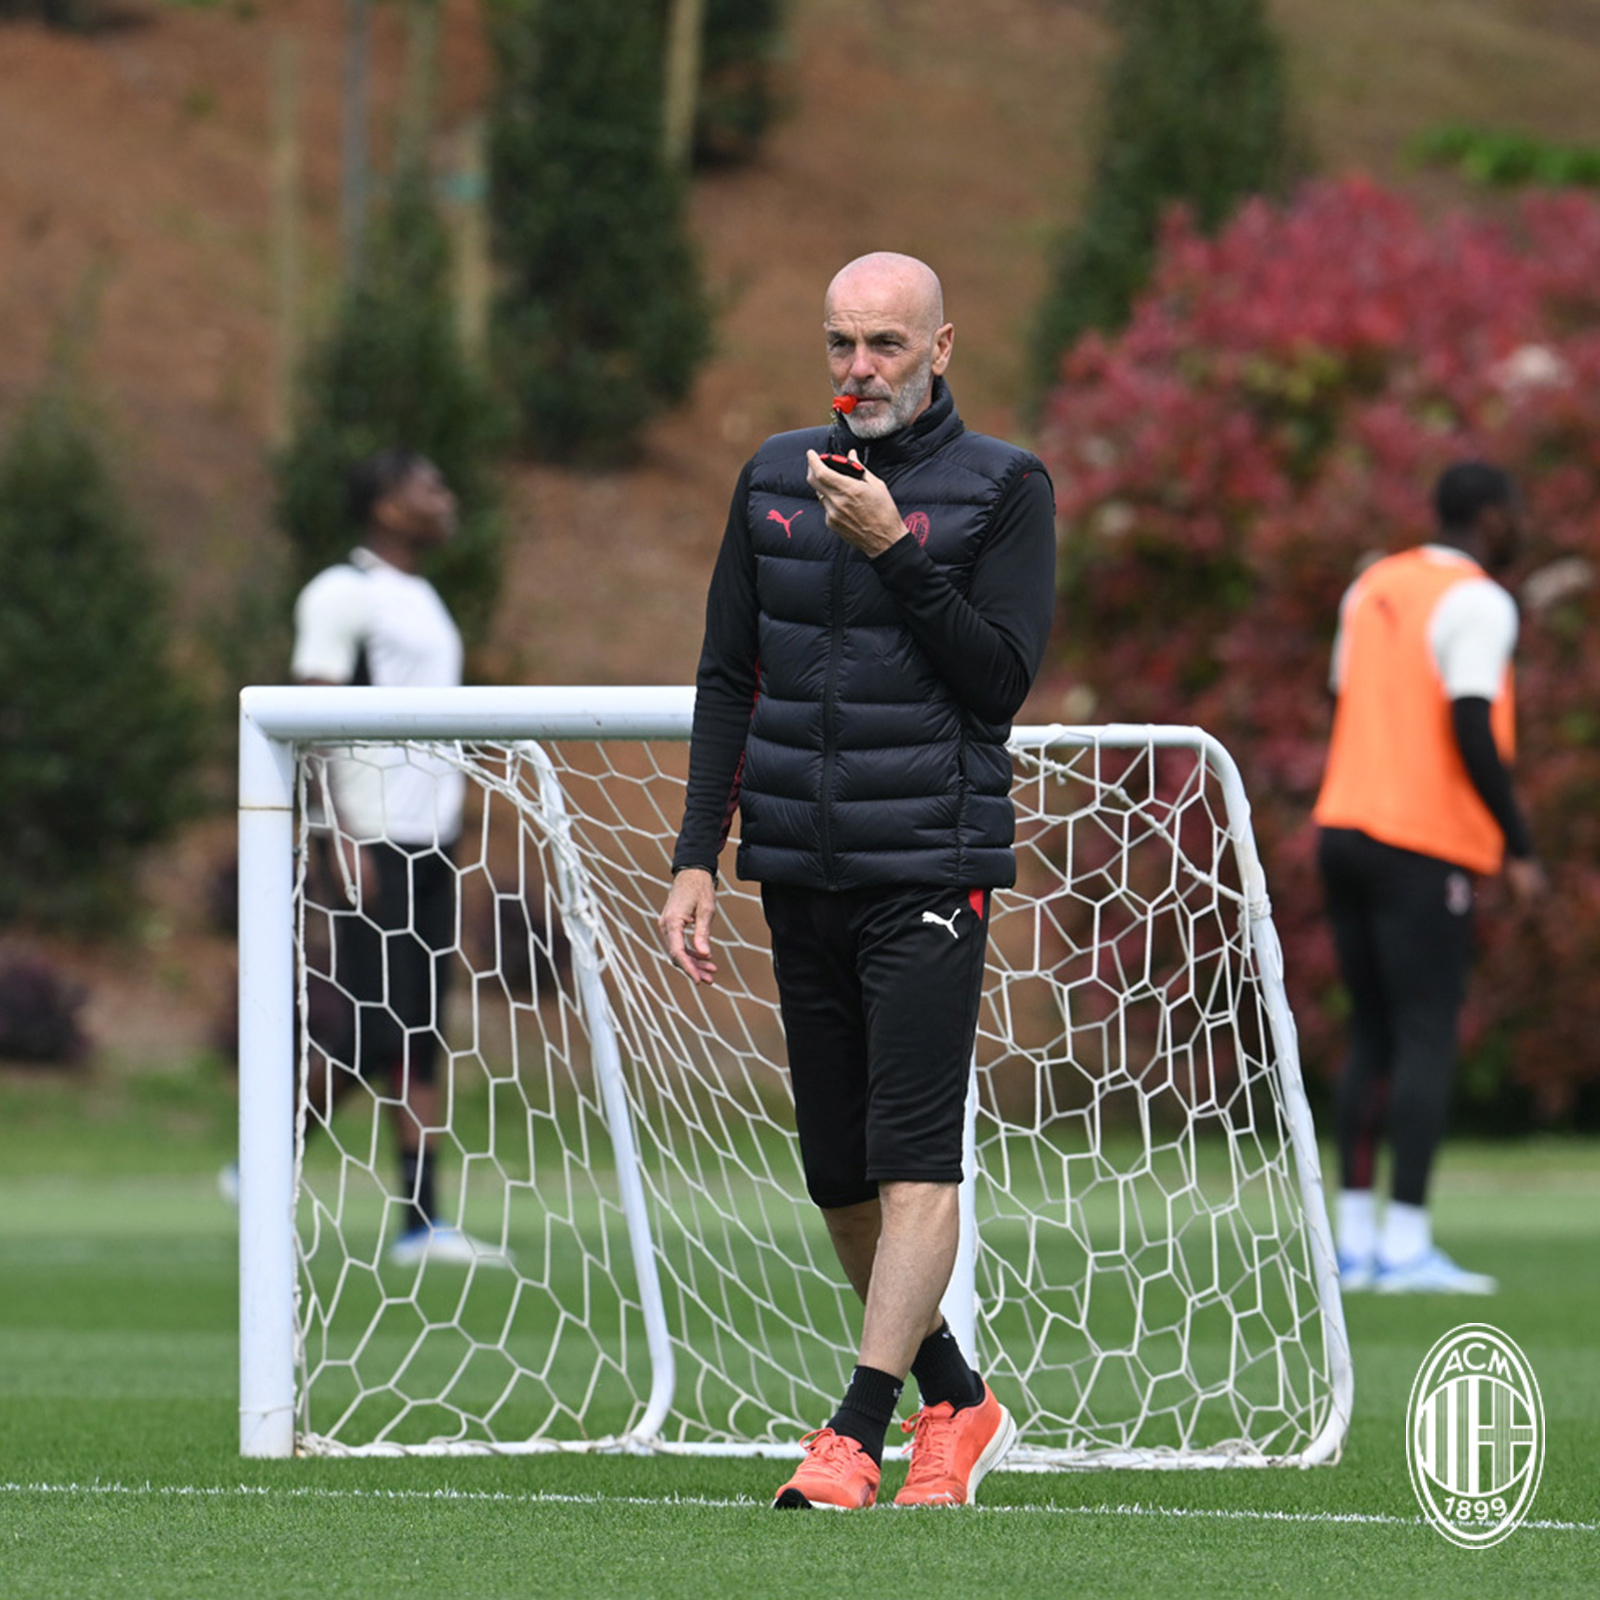 Bringing home fruits of our labour which is not finished yet, admits Stefano Pioli